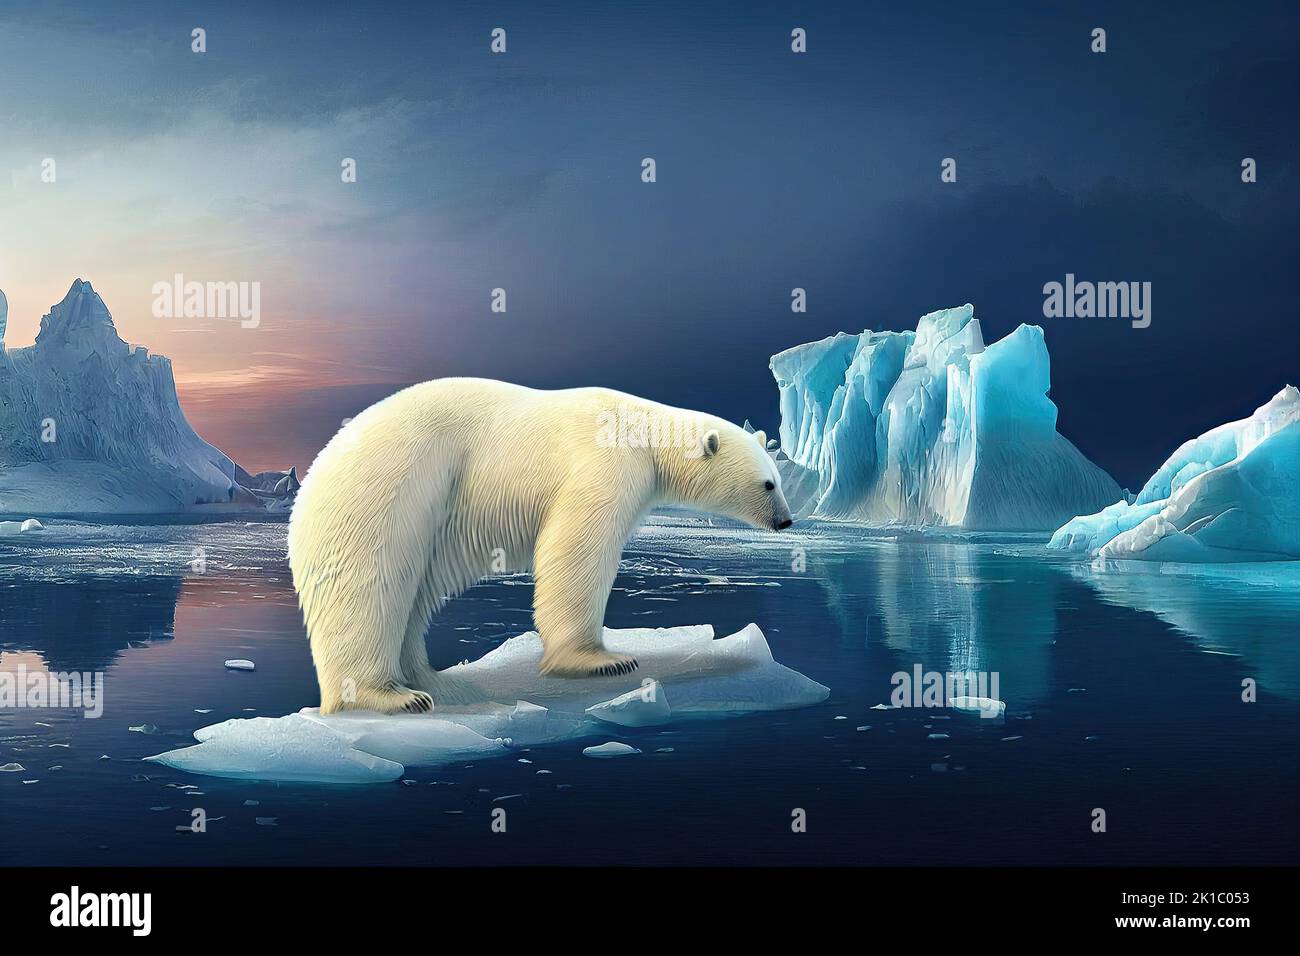 Polar bear above an iceberg in the arctic ocean. Floating icebergs due to climate change and melting glaciers. 3D illustration and digital painting. Stock Photo